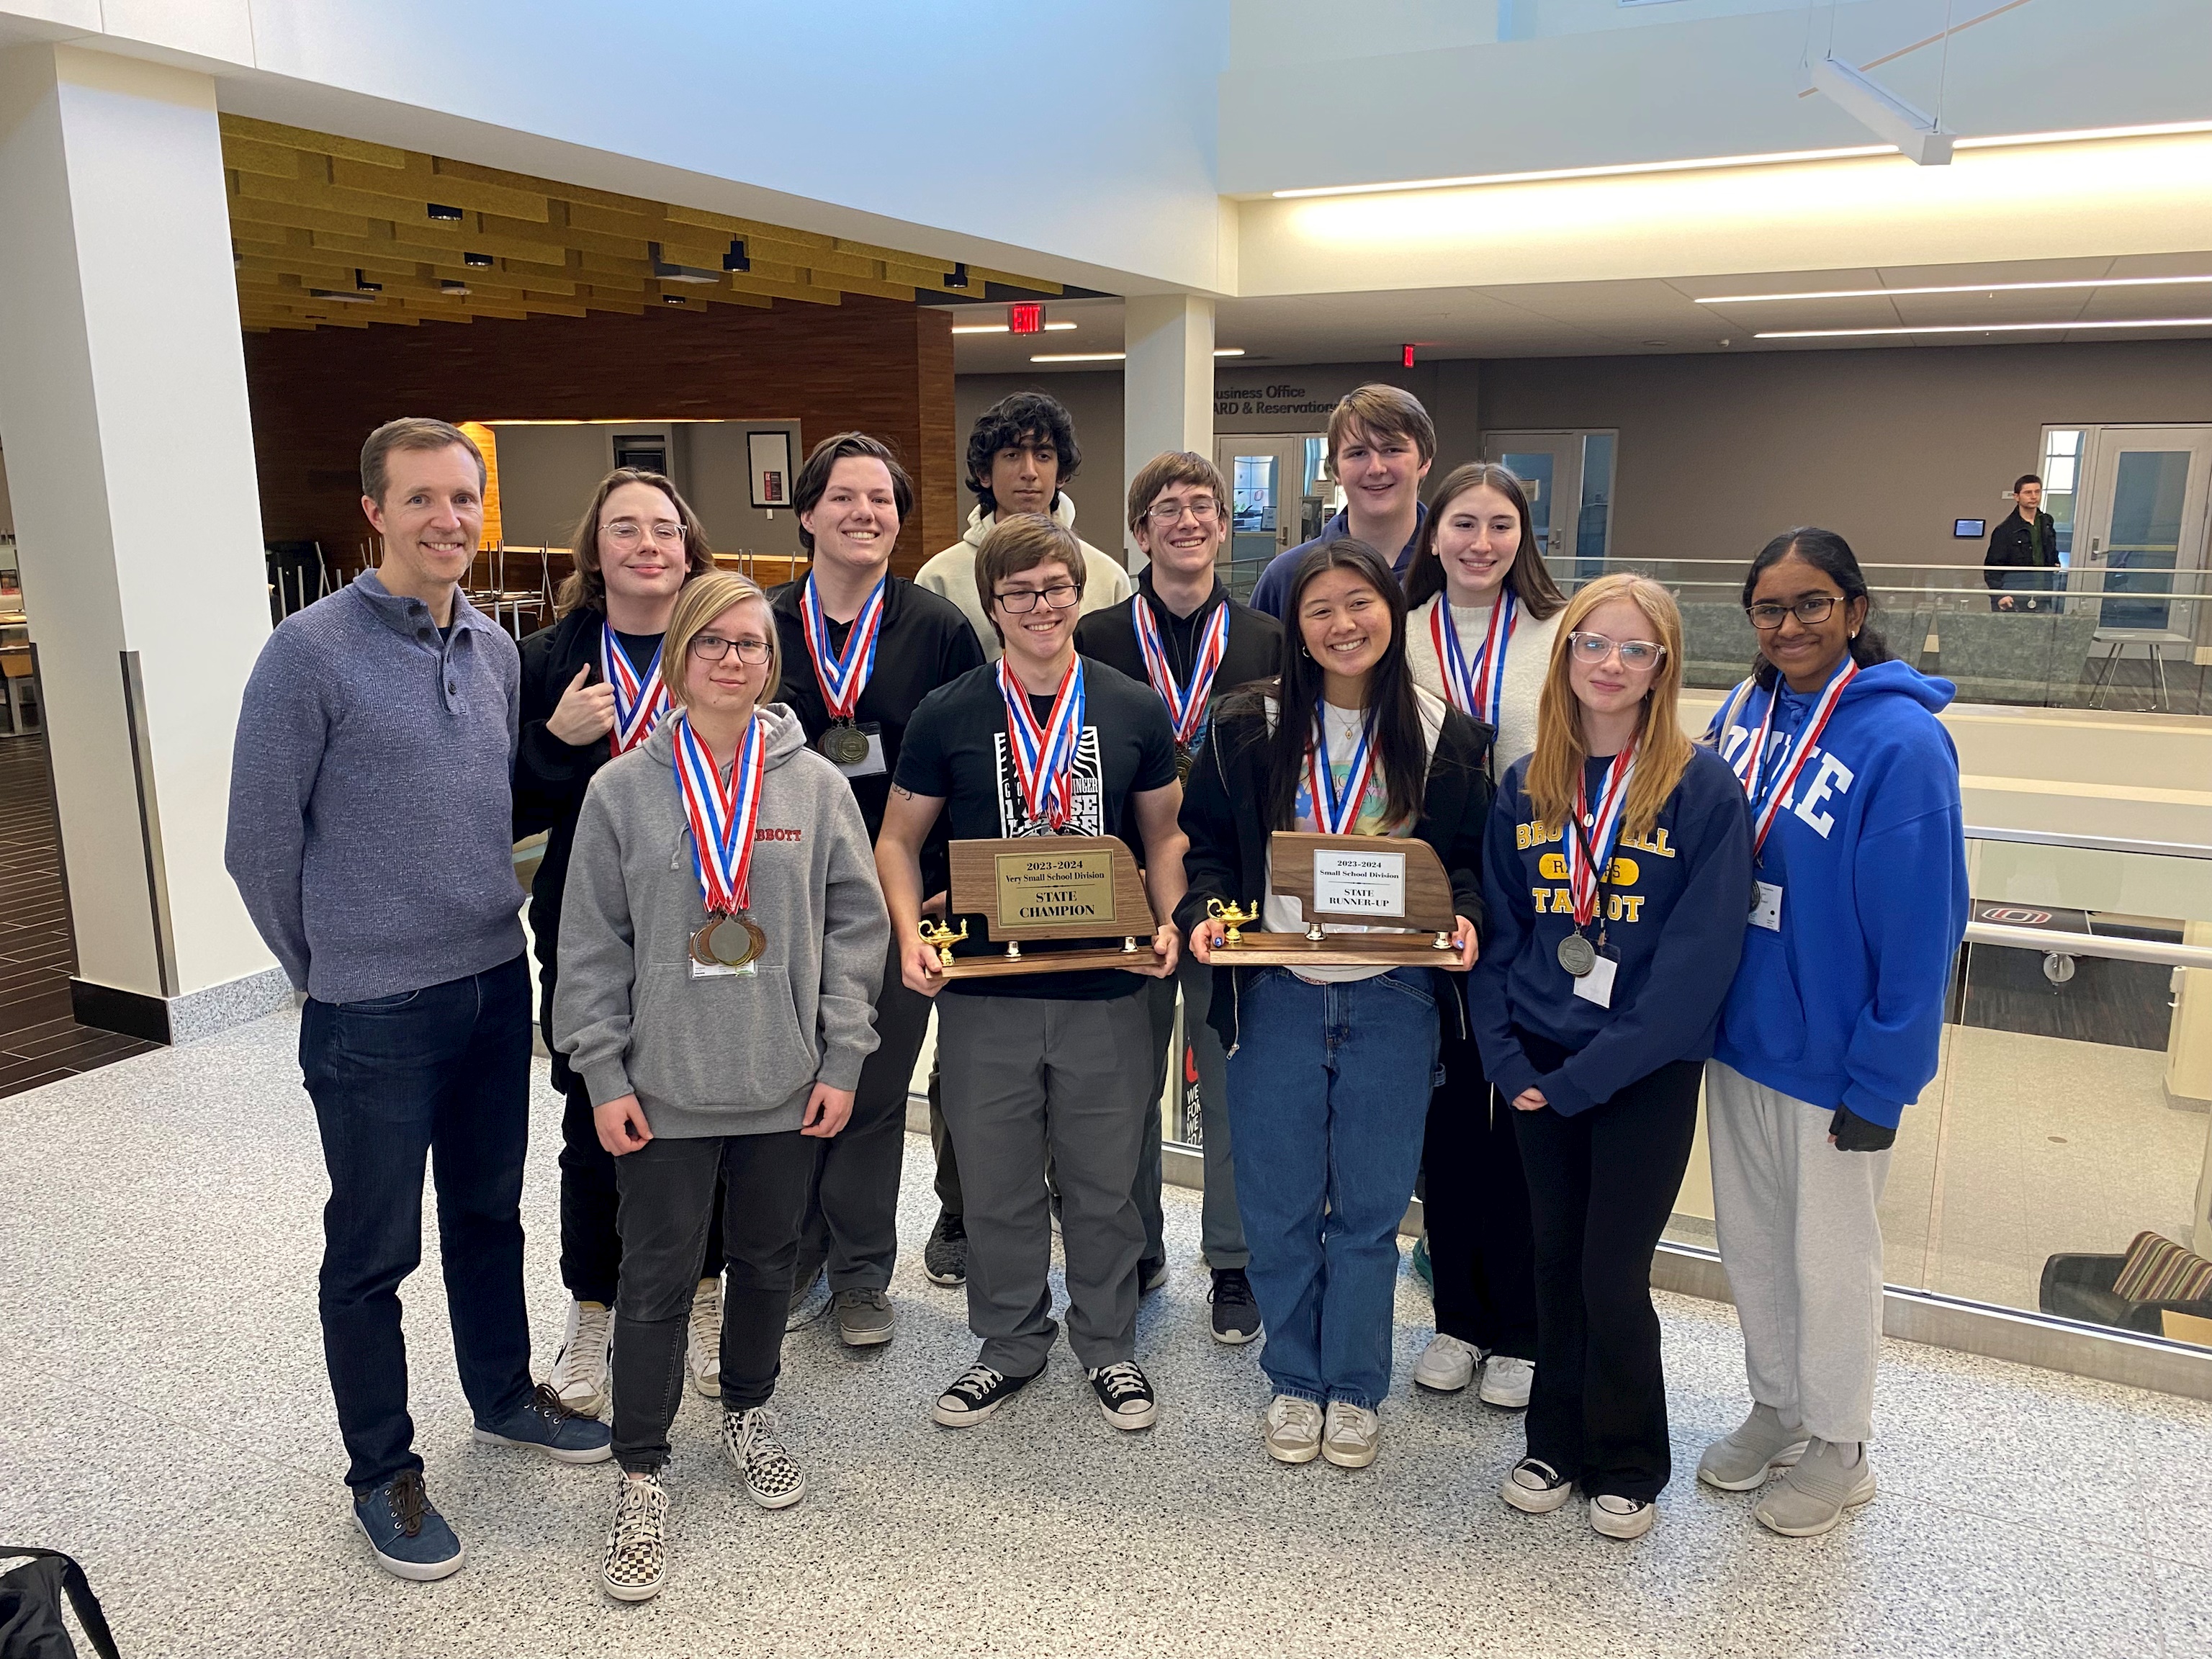 Acadec Team Earns Back-to-Back State Titles